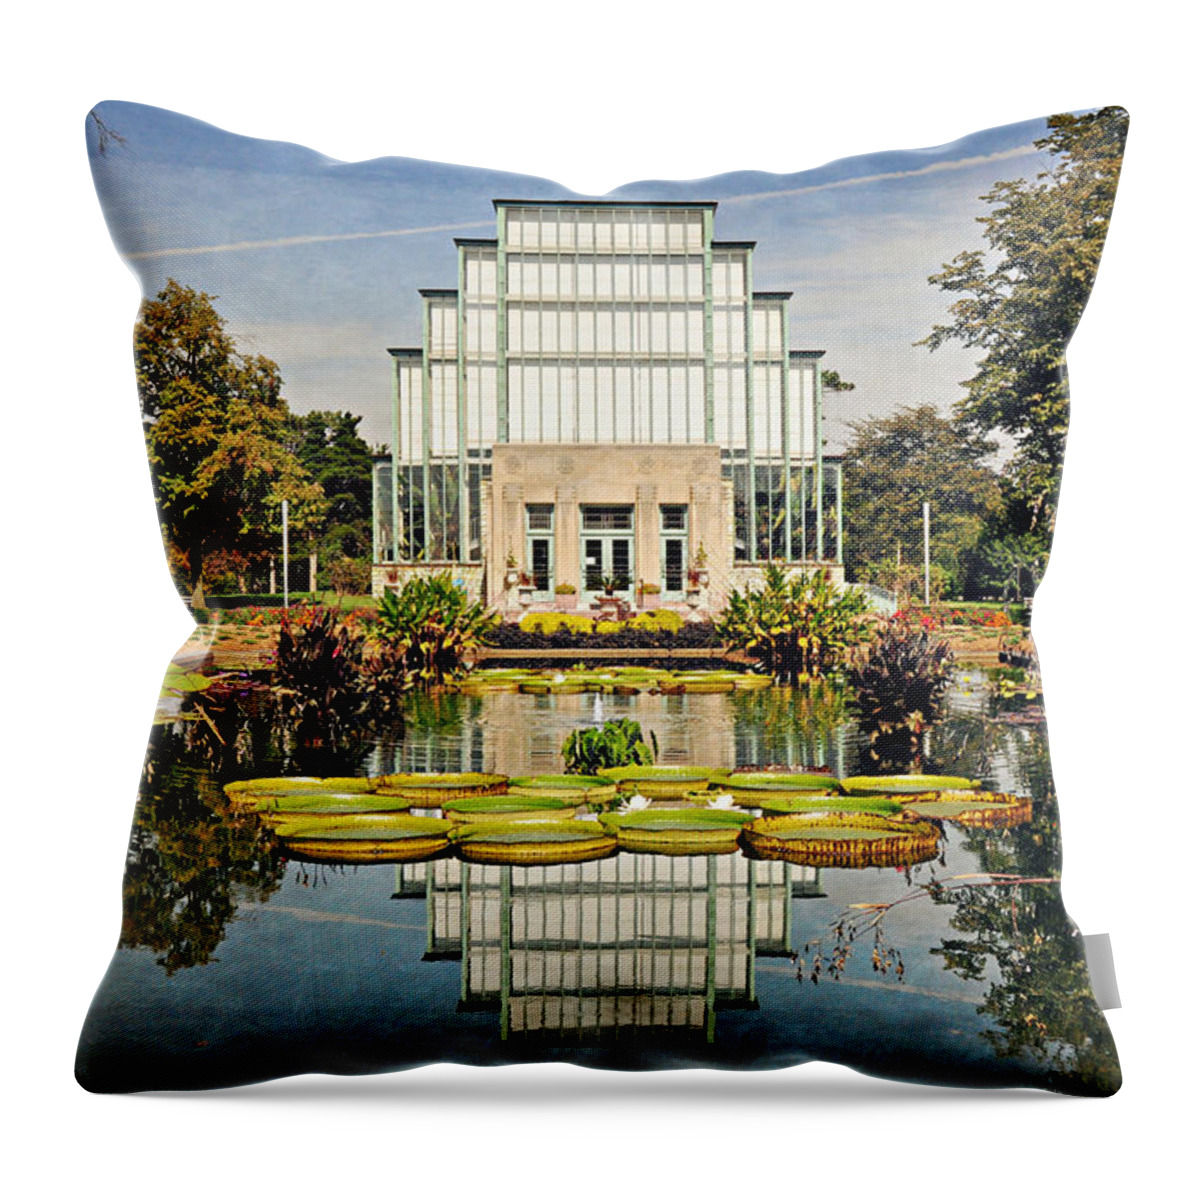 St. Louis Throw Pillow featuring the photograph Jewel Box 1 by Marty Koch